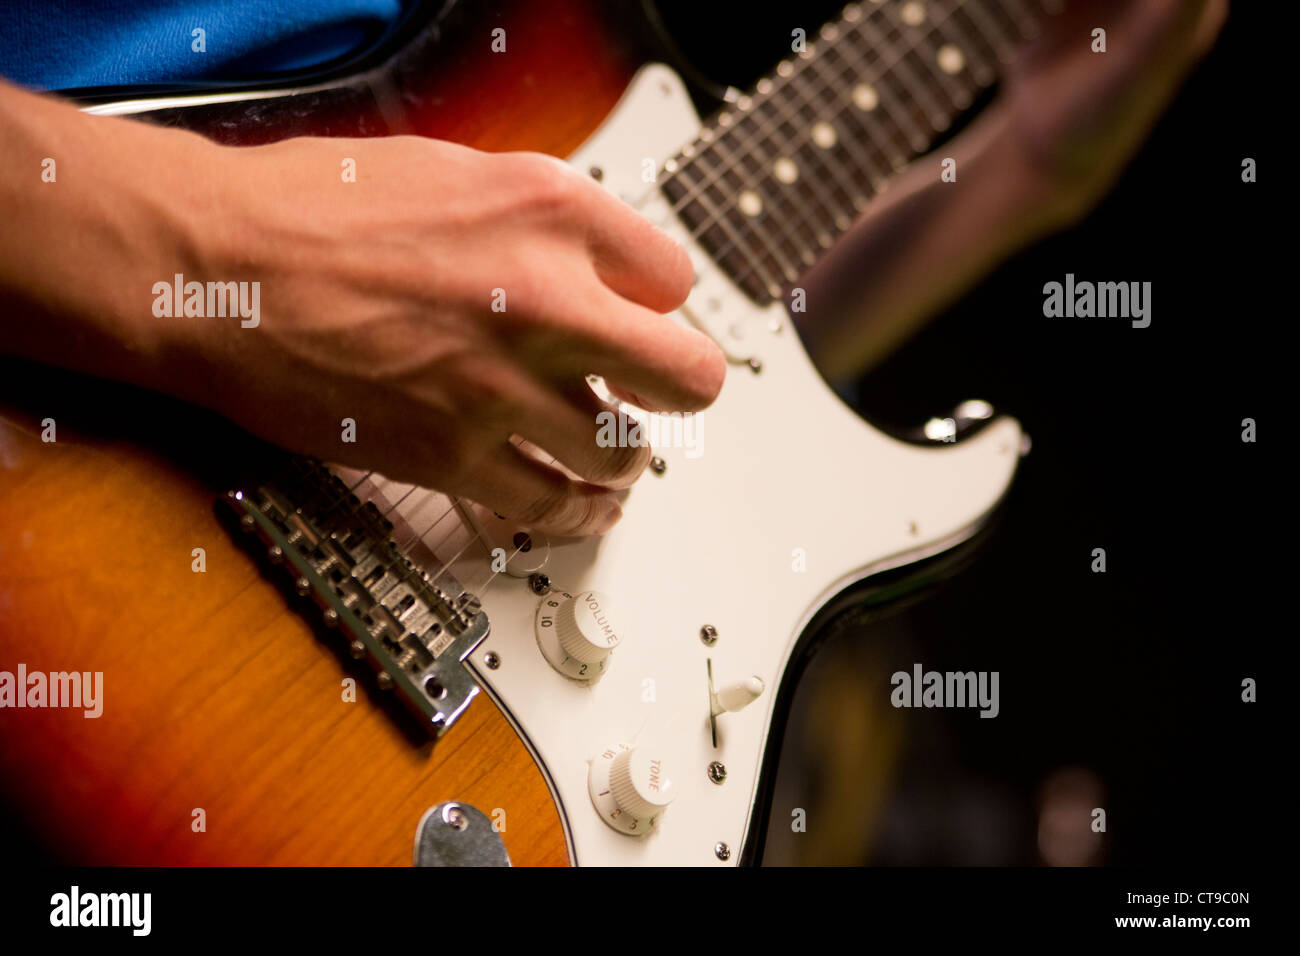 Man play guitar with zoomed long bony fingers Stock Photo